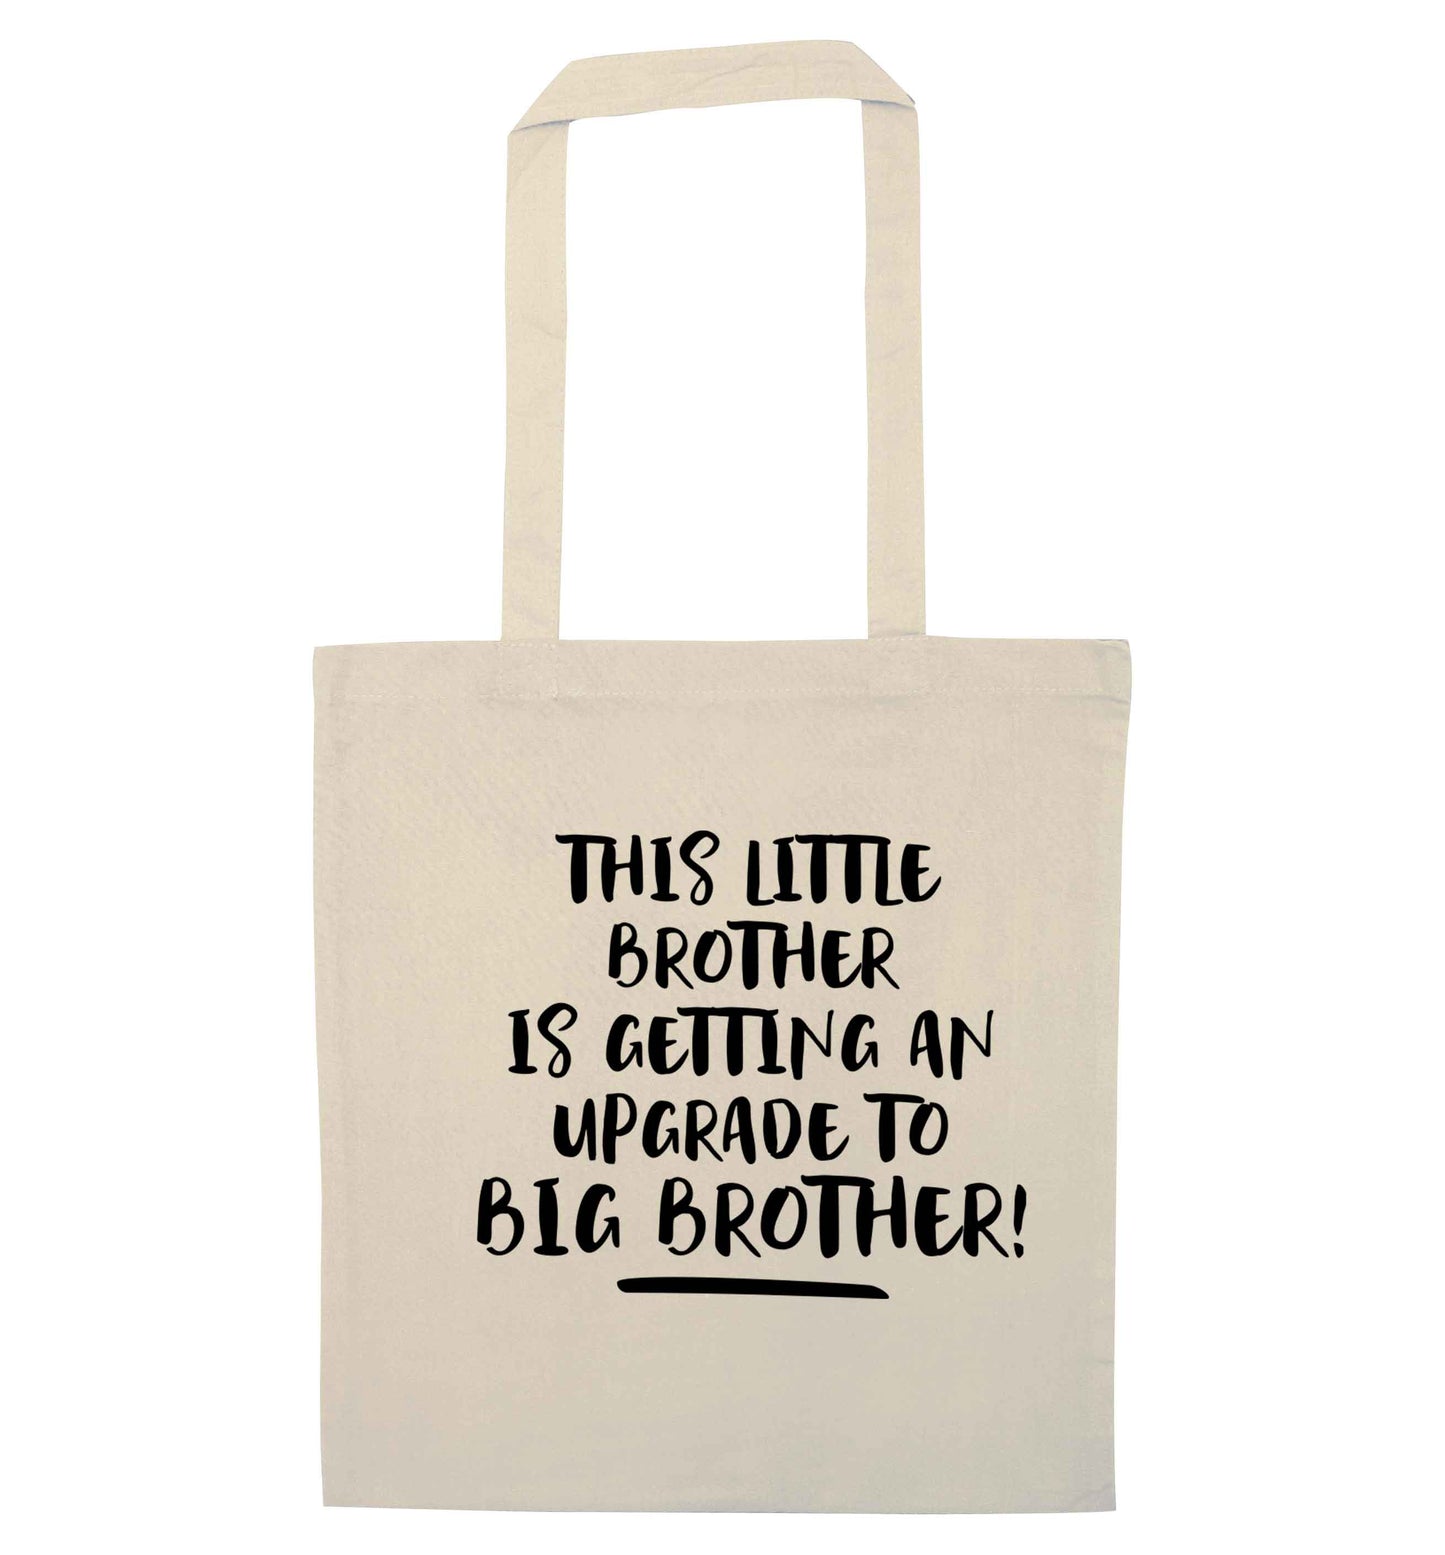 This little brother is getting an upgrade to big brother! natural tote bag